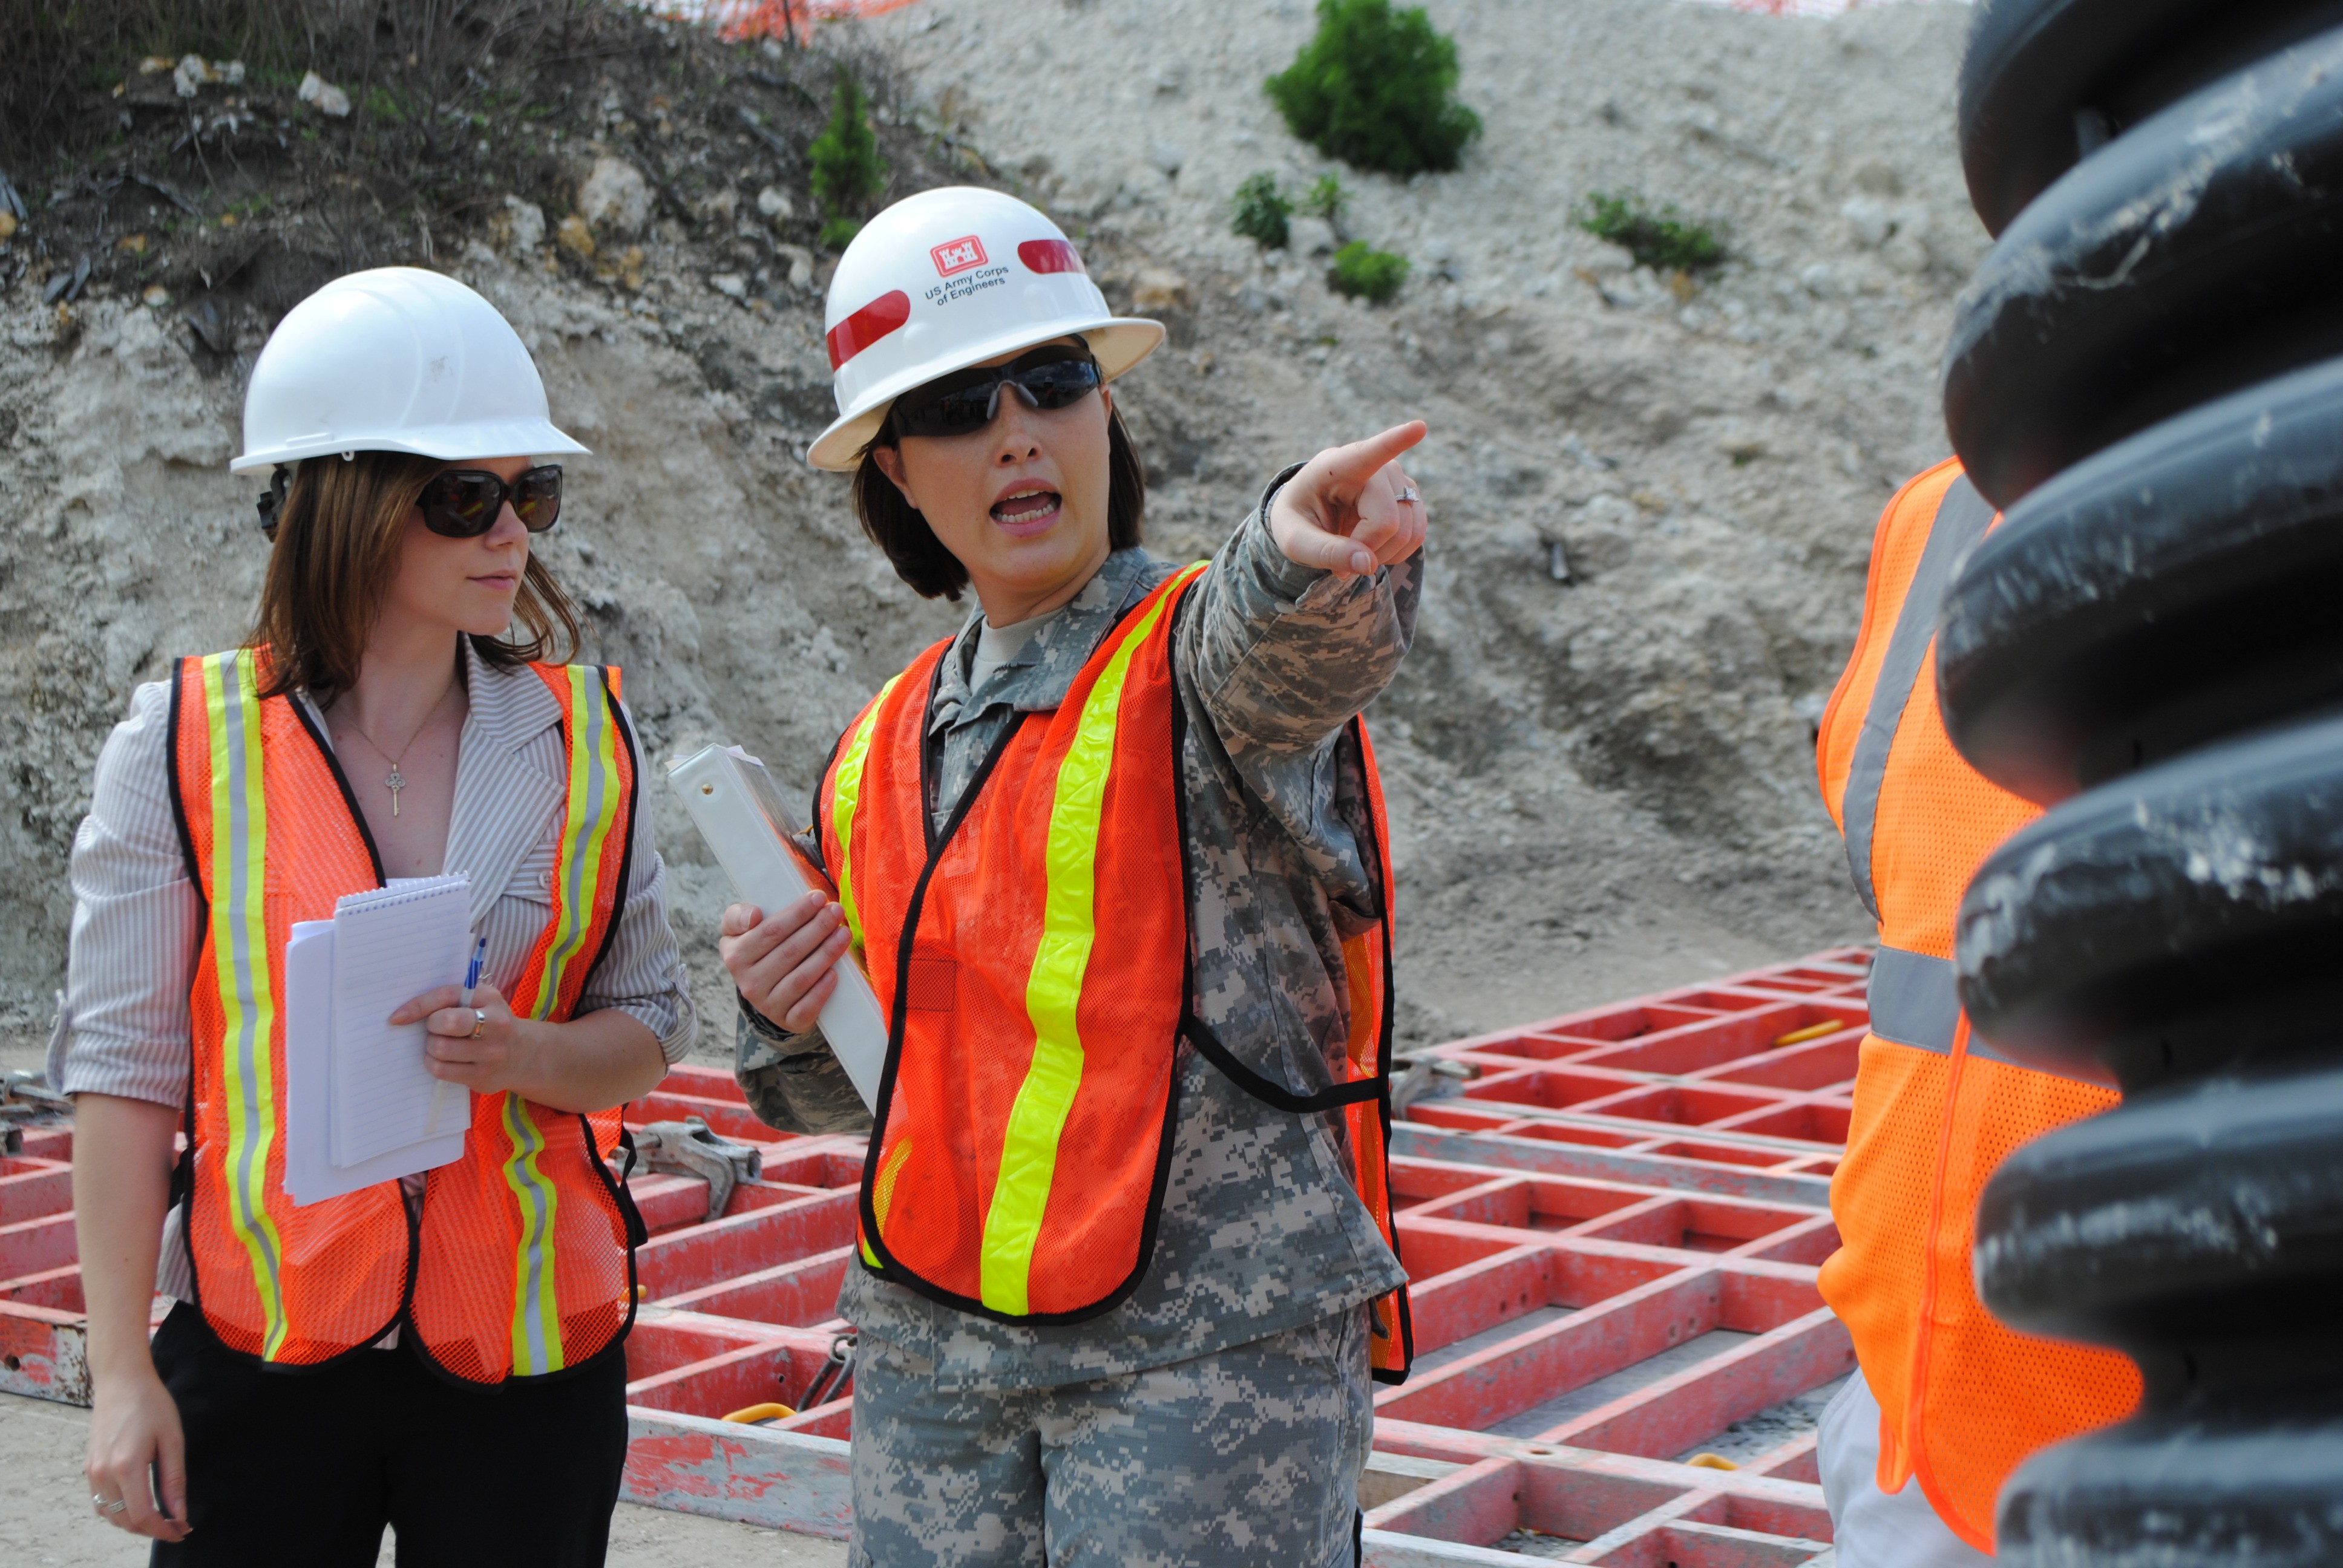 u-s-army-corps-of-engineers-working-to-improve-the-nation-s-infrastructure-article-the